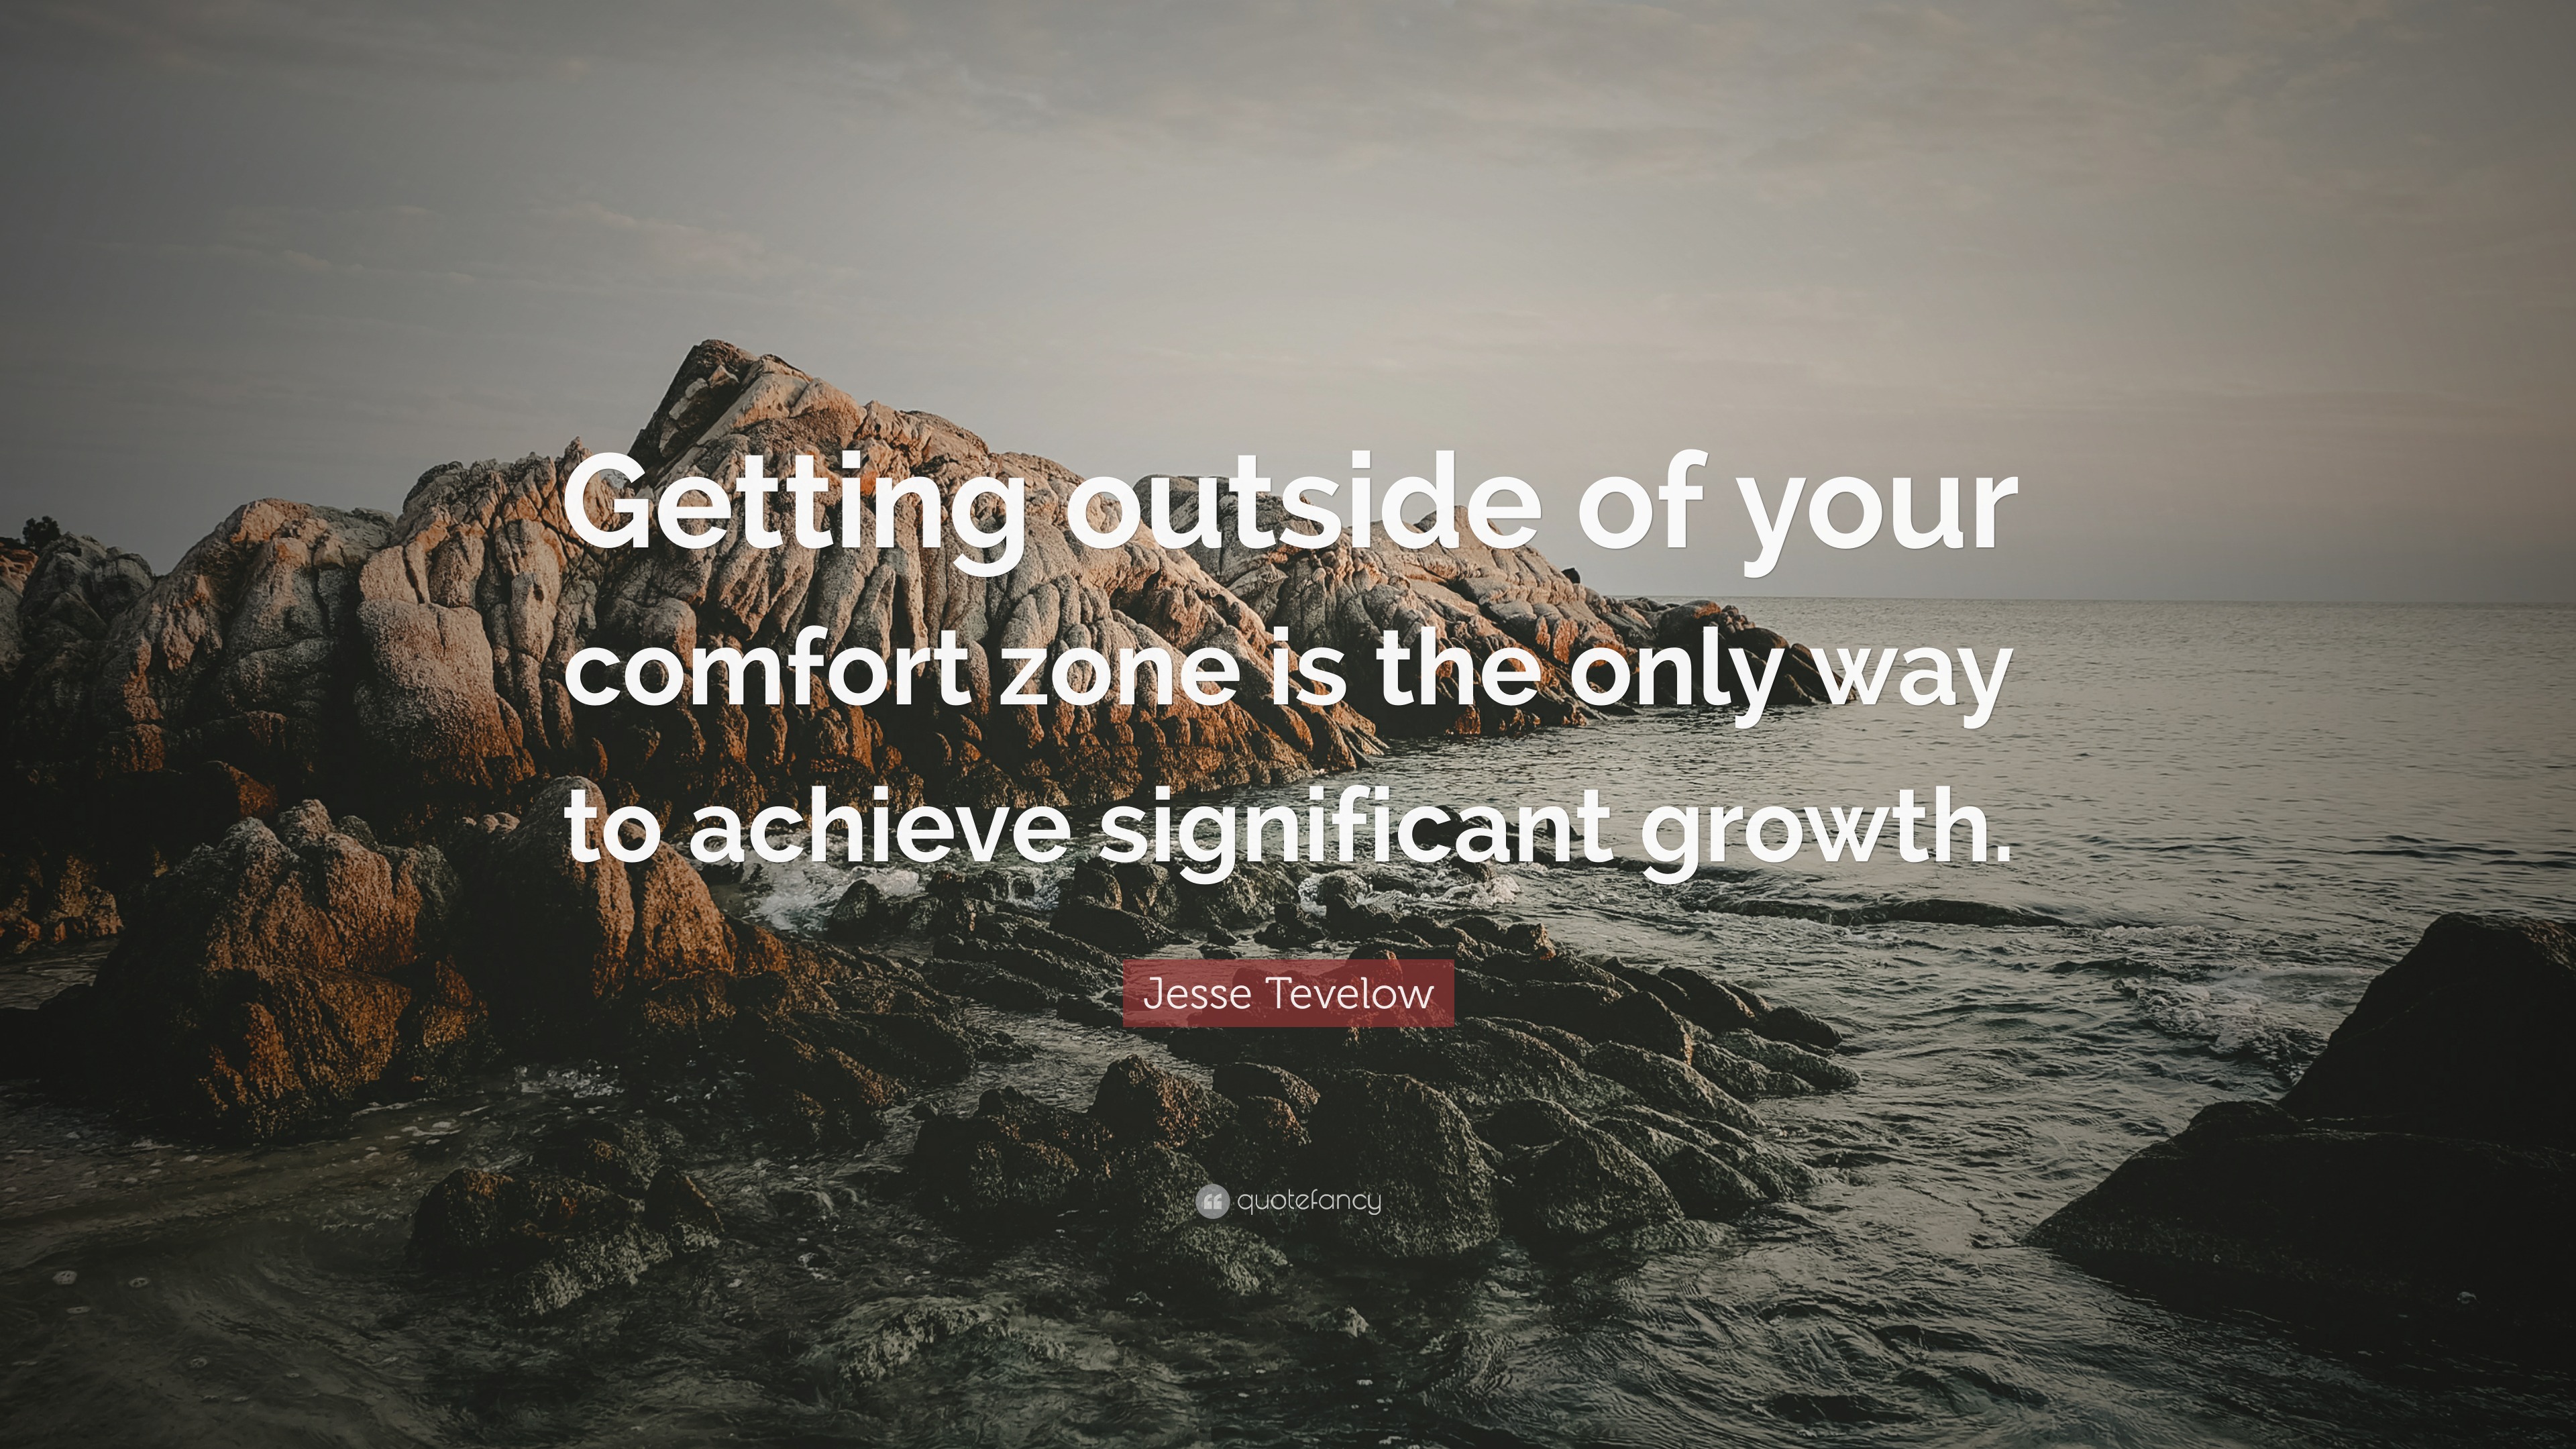 It's Not Always About Getting Out of Your Comfort Zone – Our Next